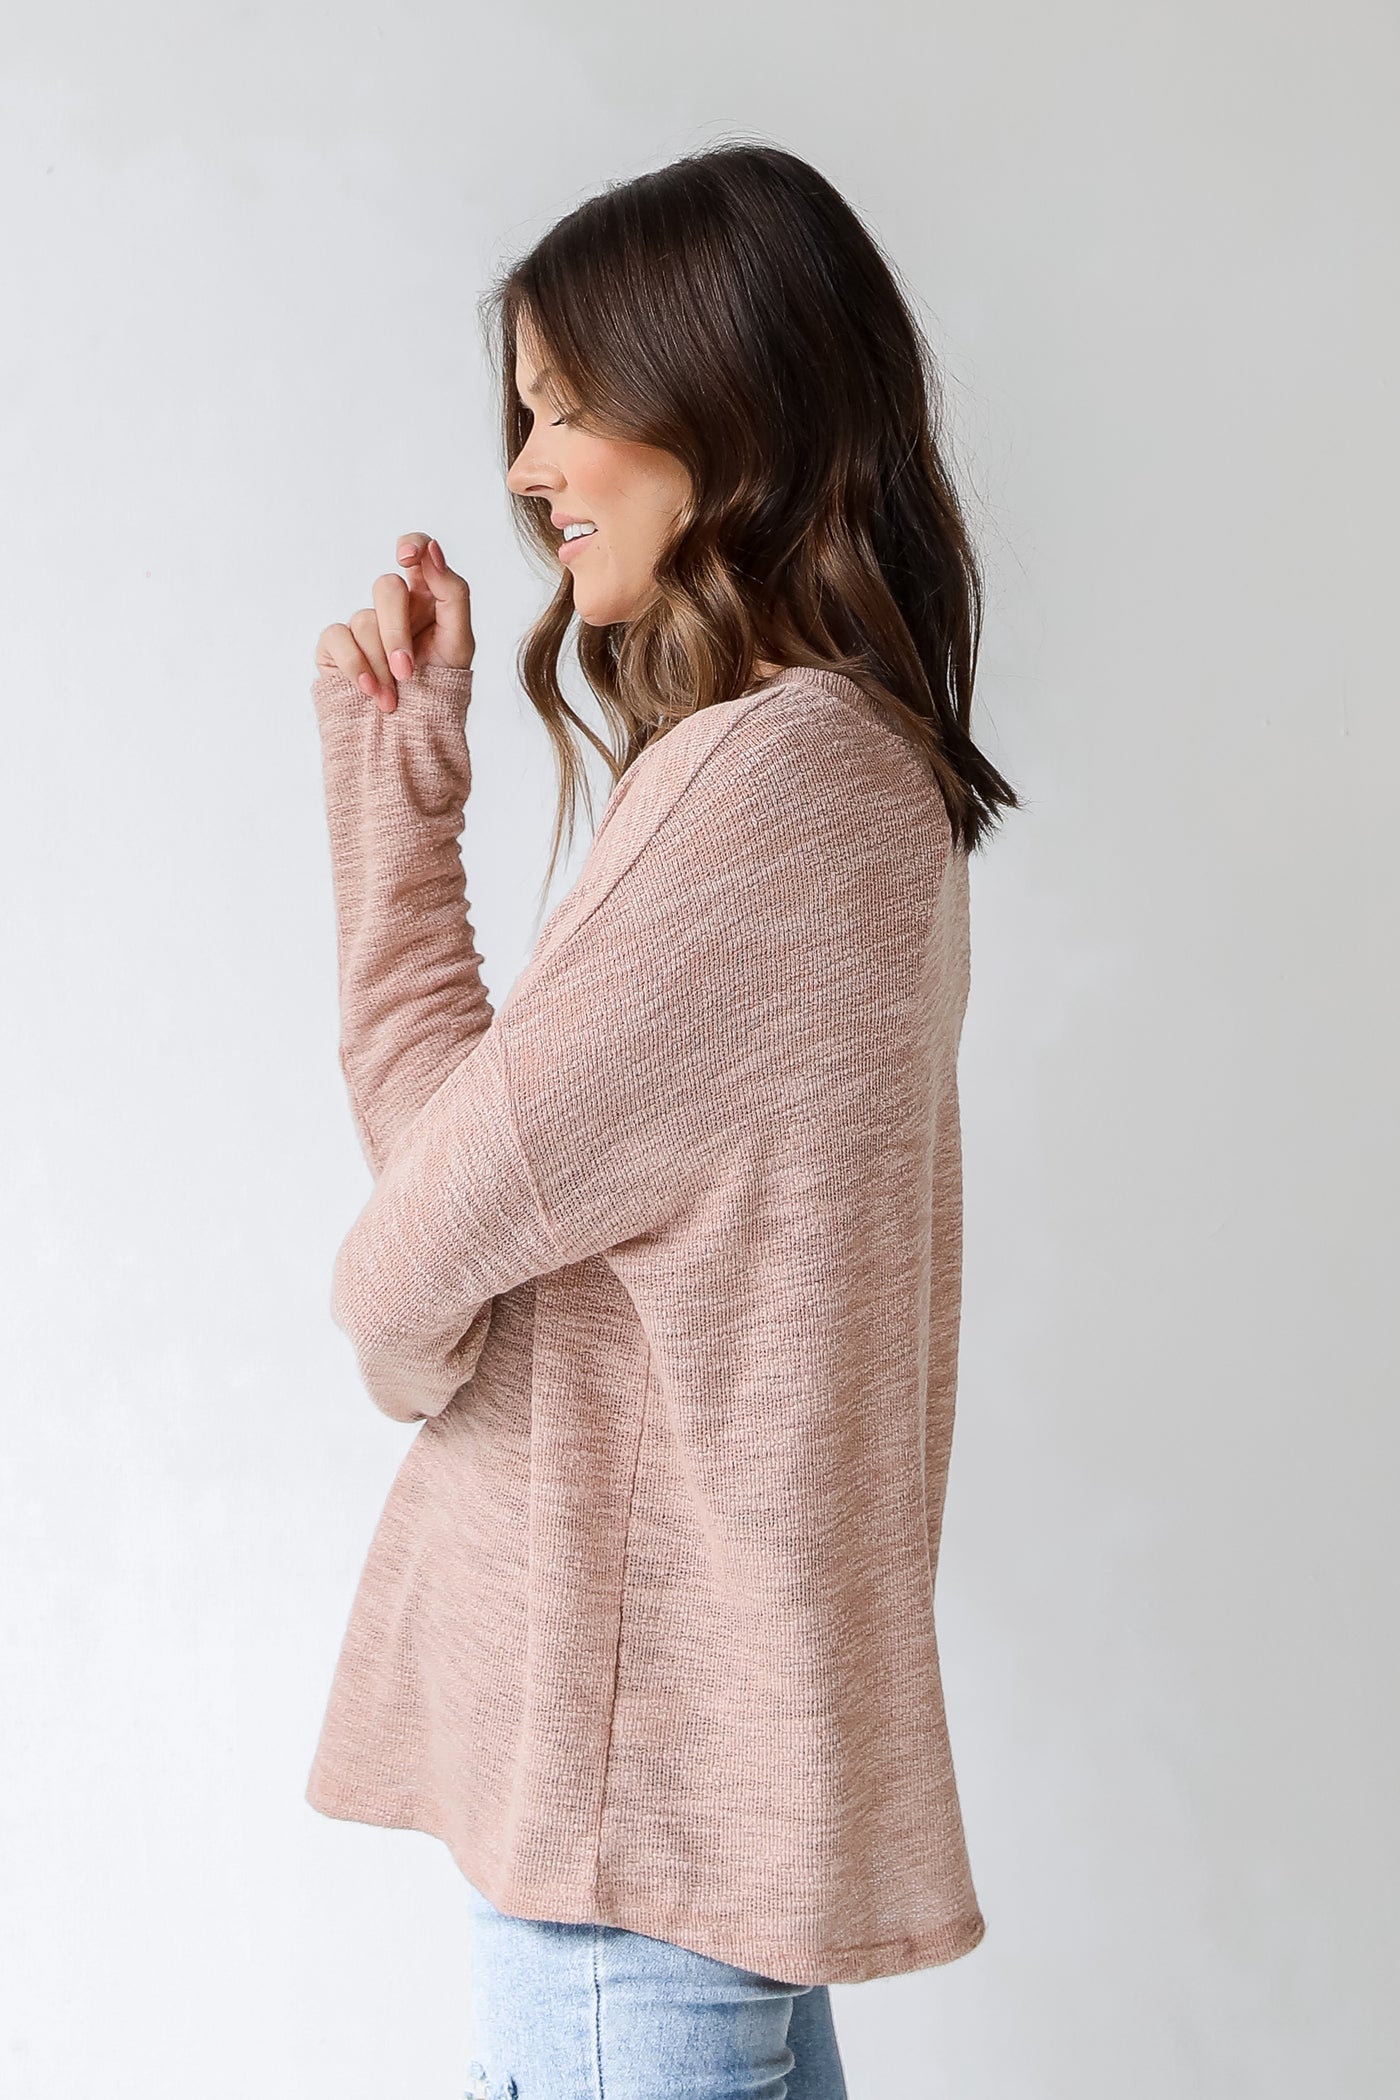 Knit Top in blush side view